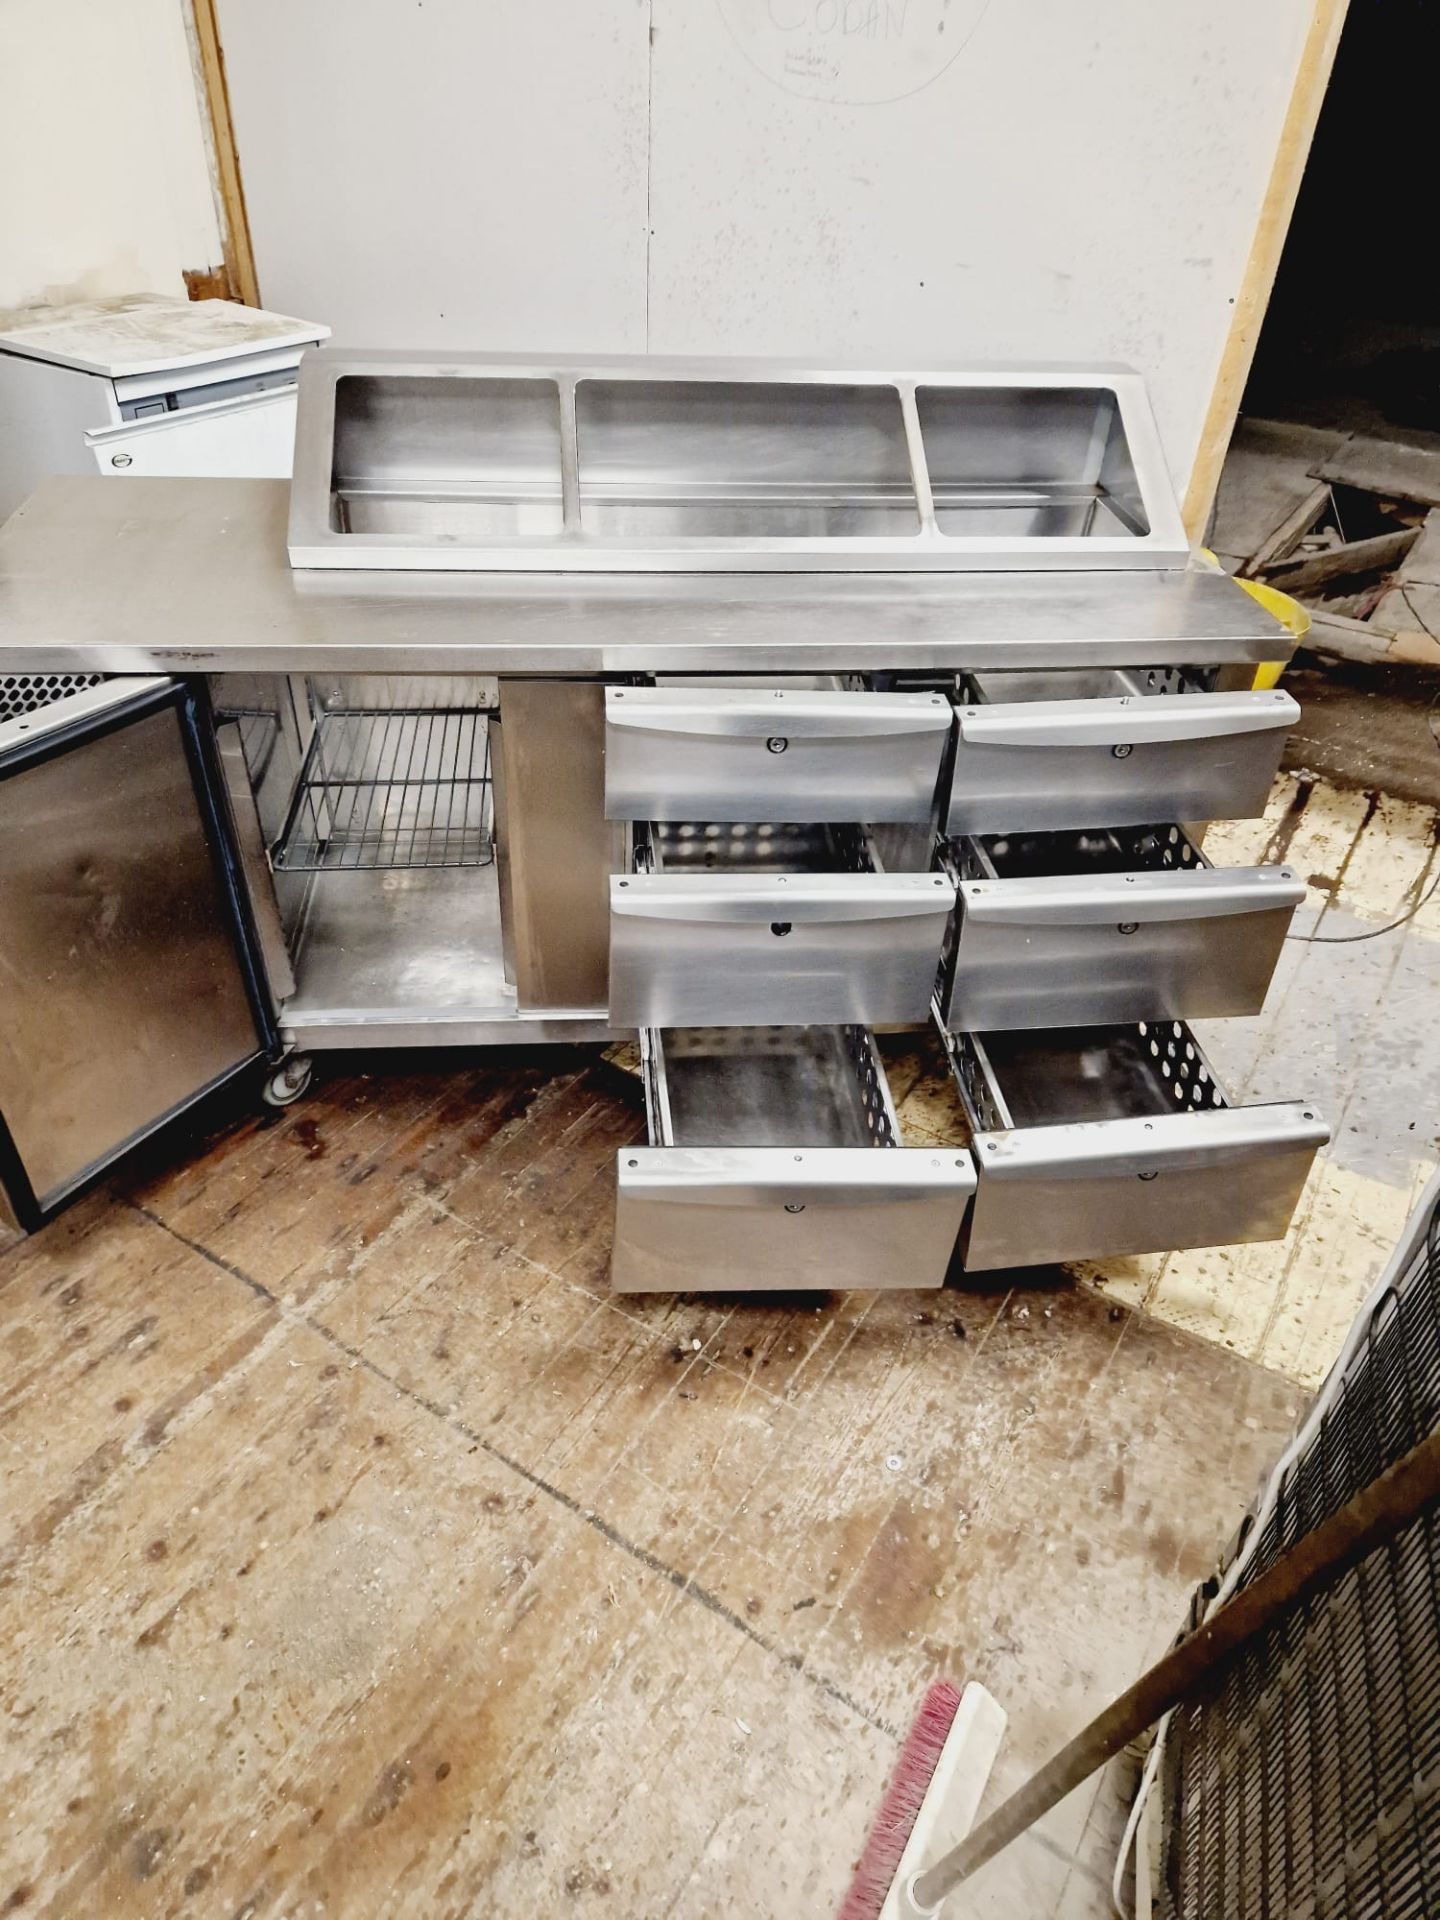 PRECISION 6 DRAWER AND 1 DOOR PERP FRIDGE SALD BAR - PIZZA PREP FRIDGE - FULLY WORKING AND SERVICED - Image 2 of 3